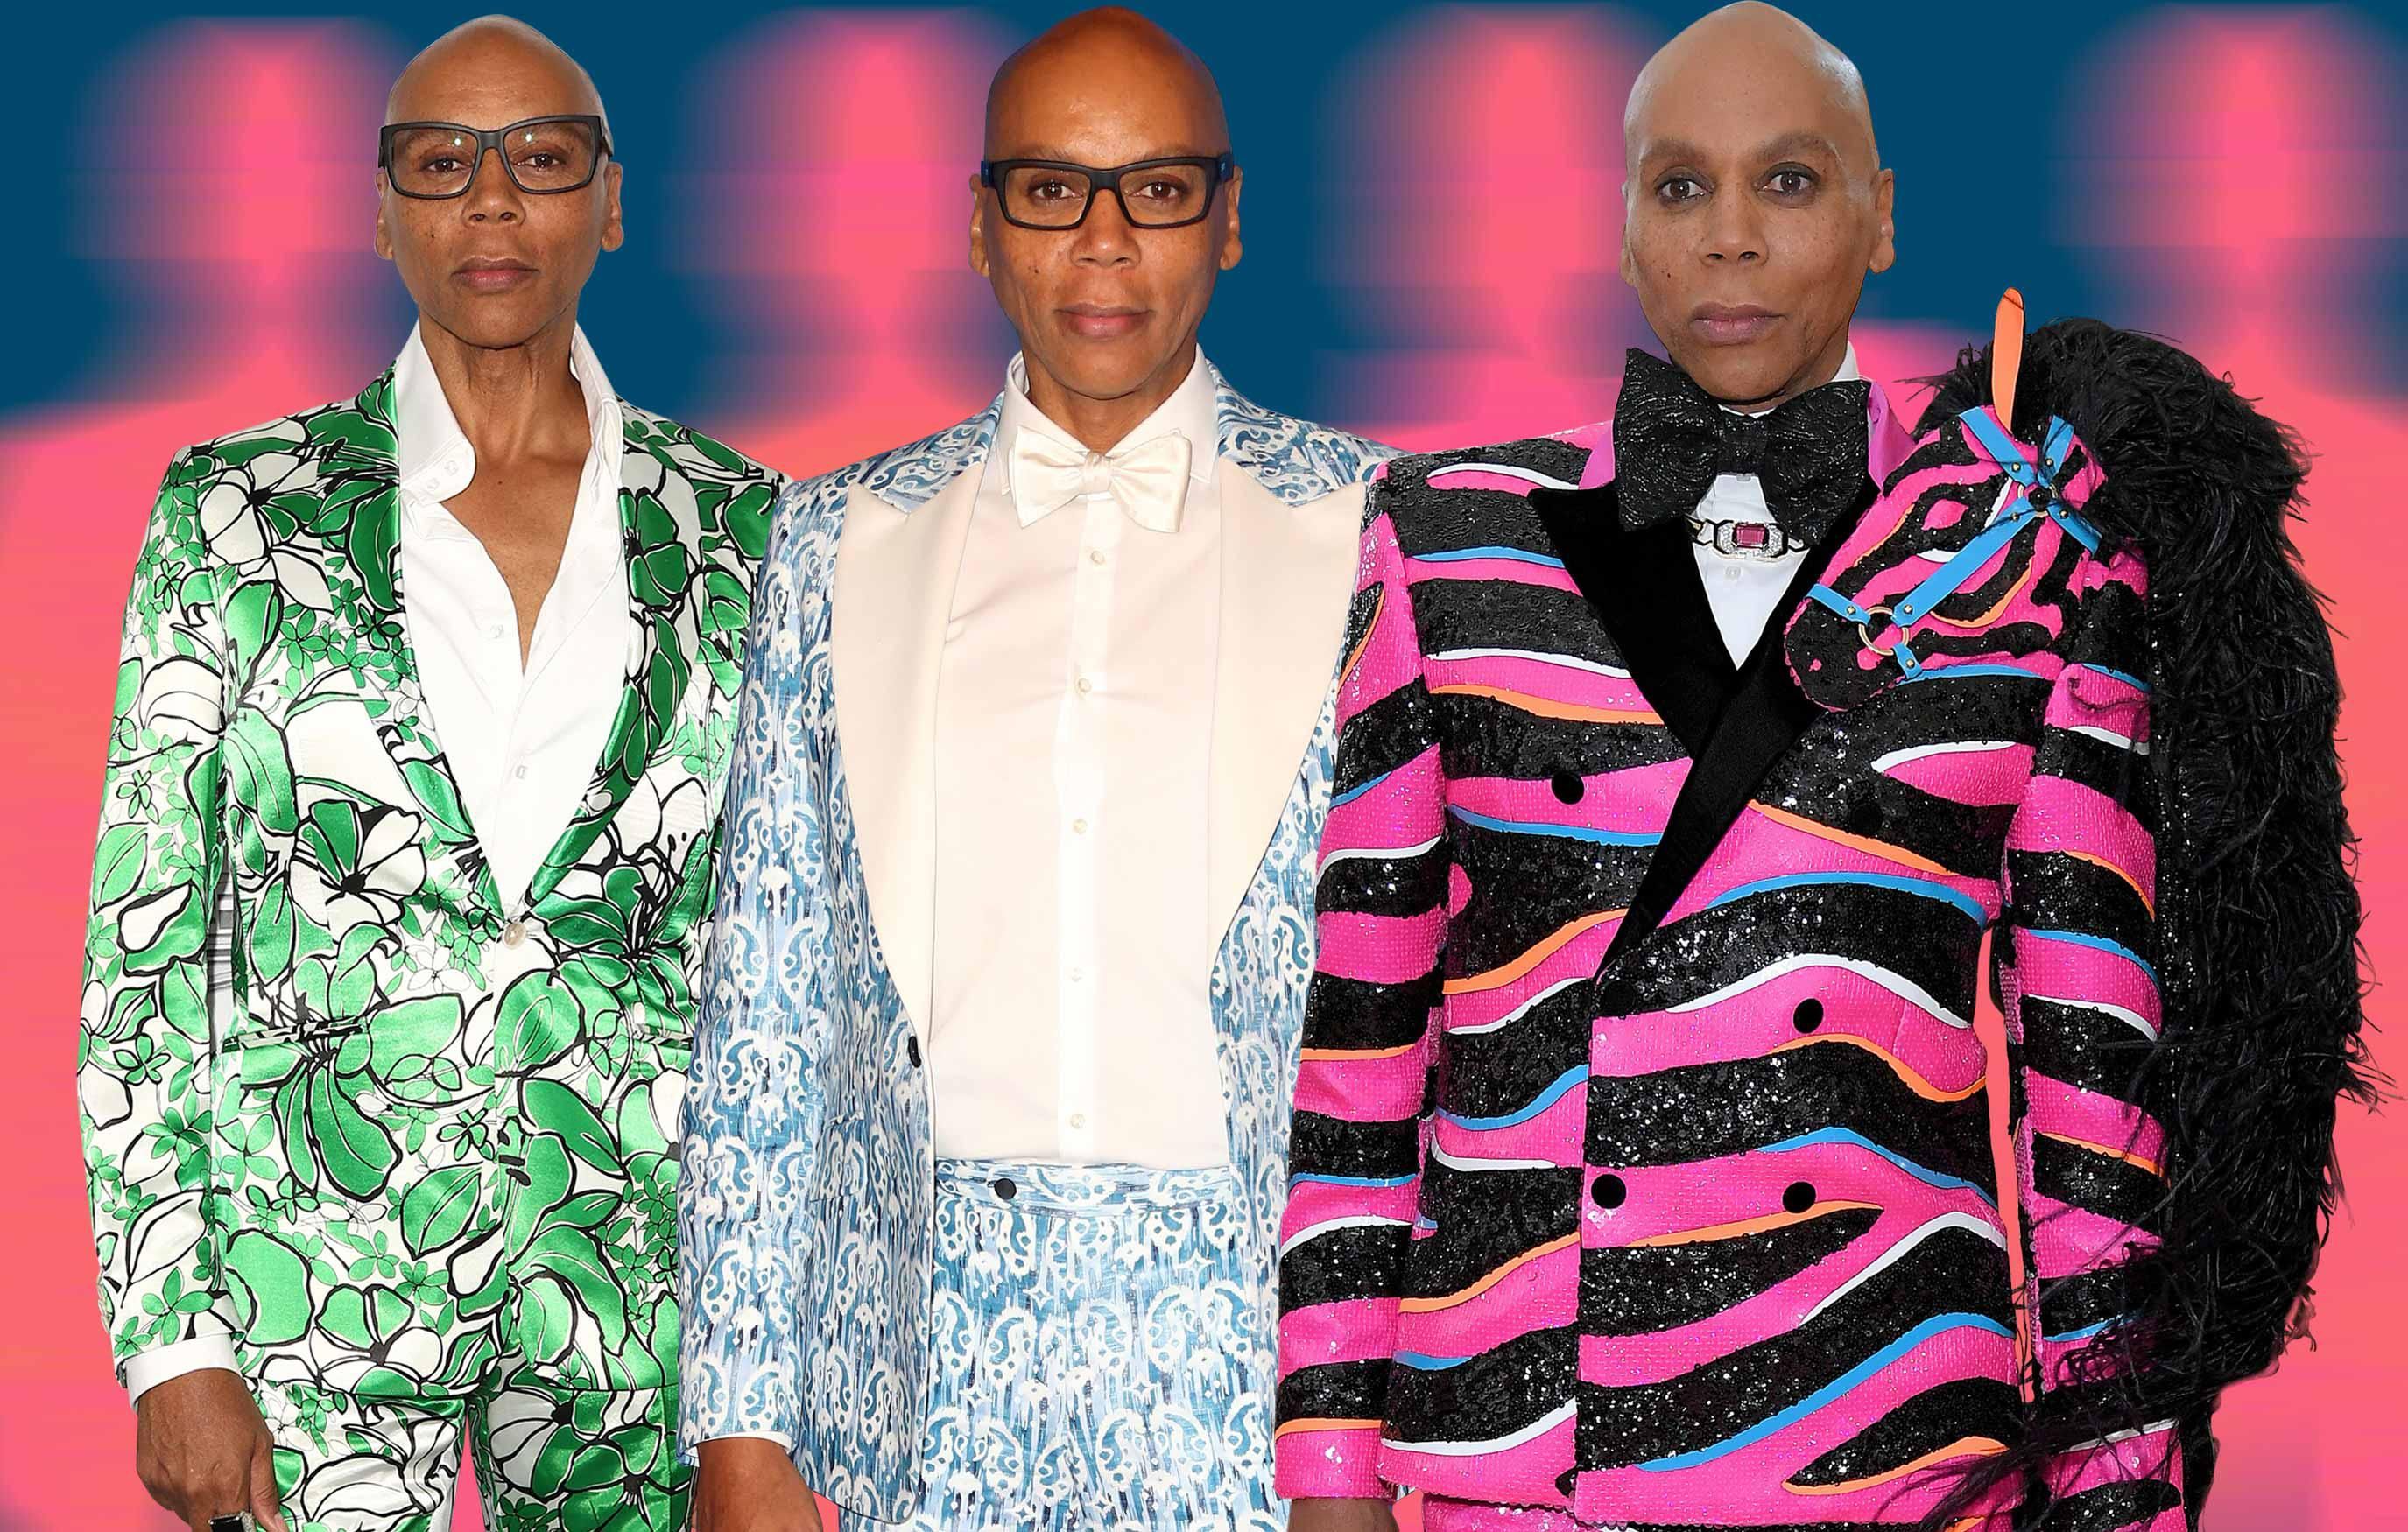 Drag Race star RuPaul wearing 3 different outfits in this composite image.